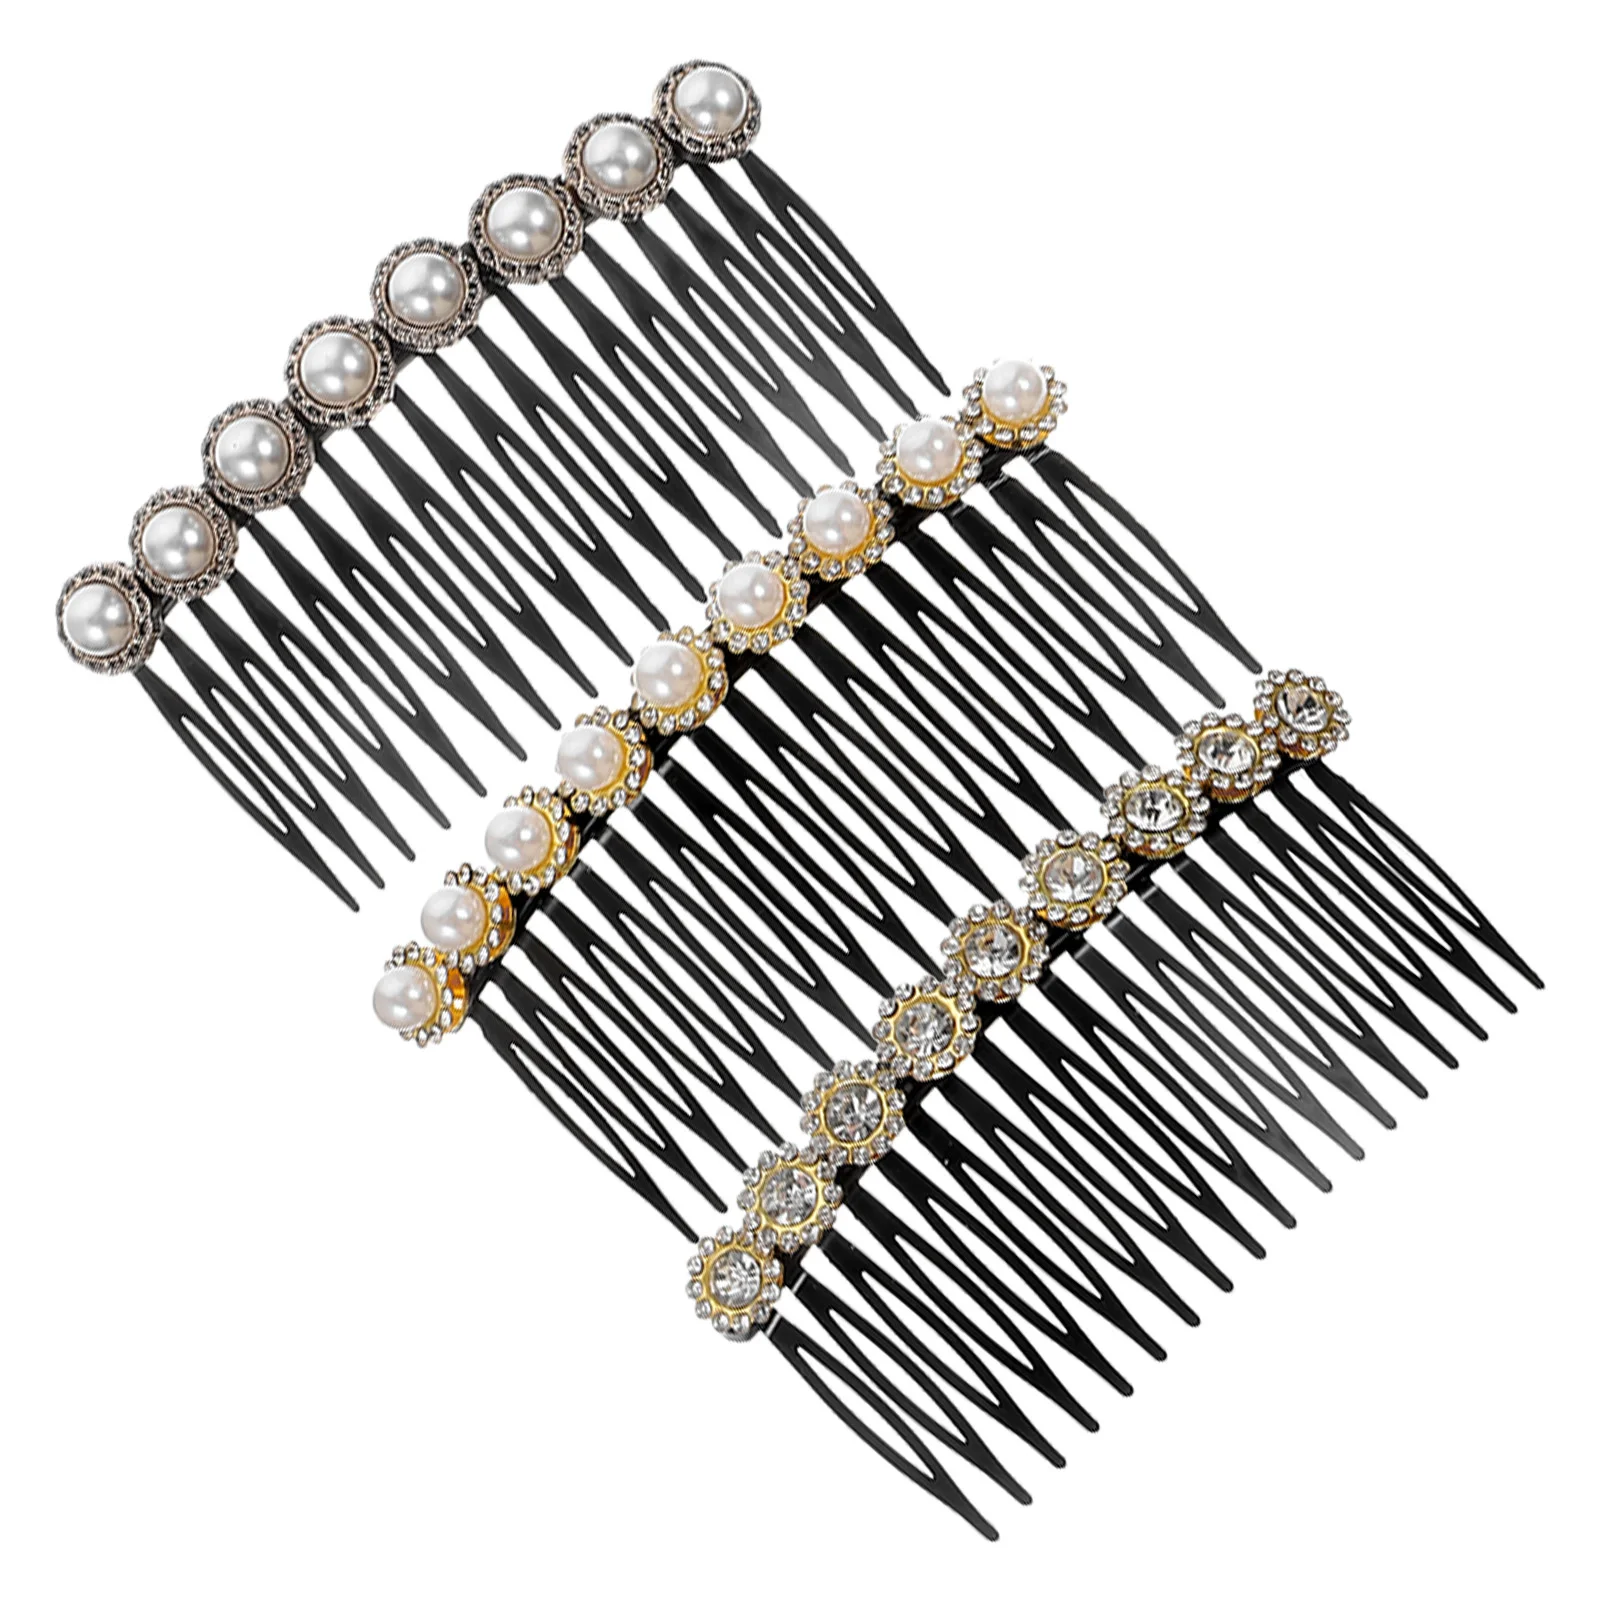 

3 Pcs Crystal Girl Hair Comb Broken Hairpin on Female Back of Head Side Comb Girl The Pearl Accessories Combs for Women